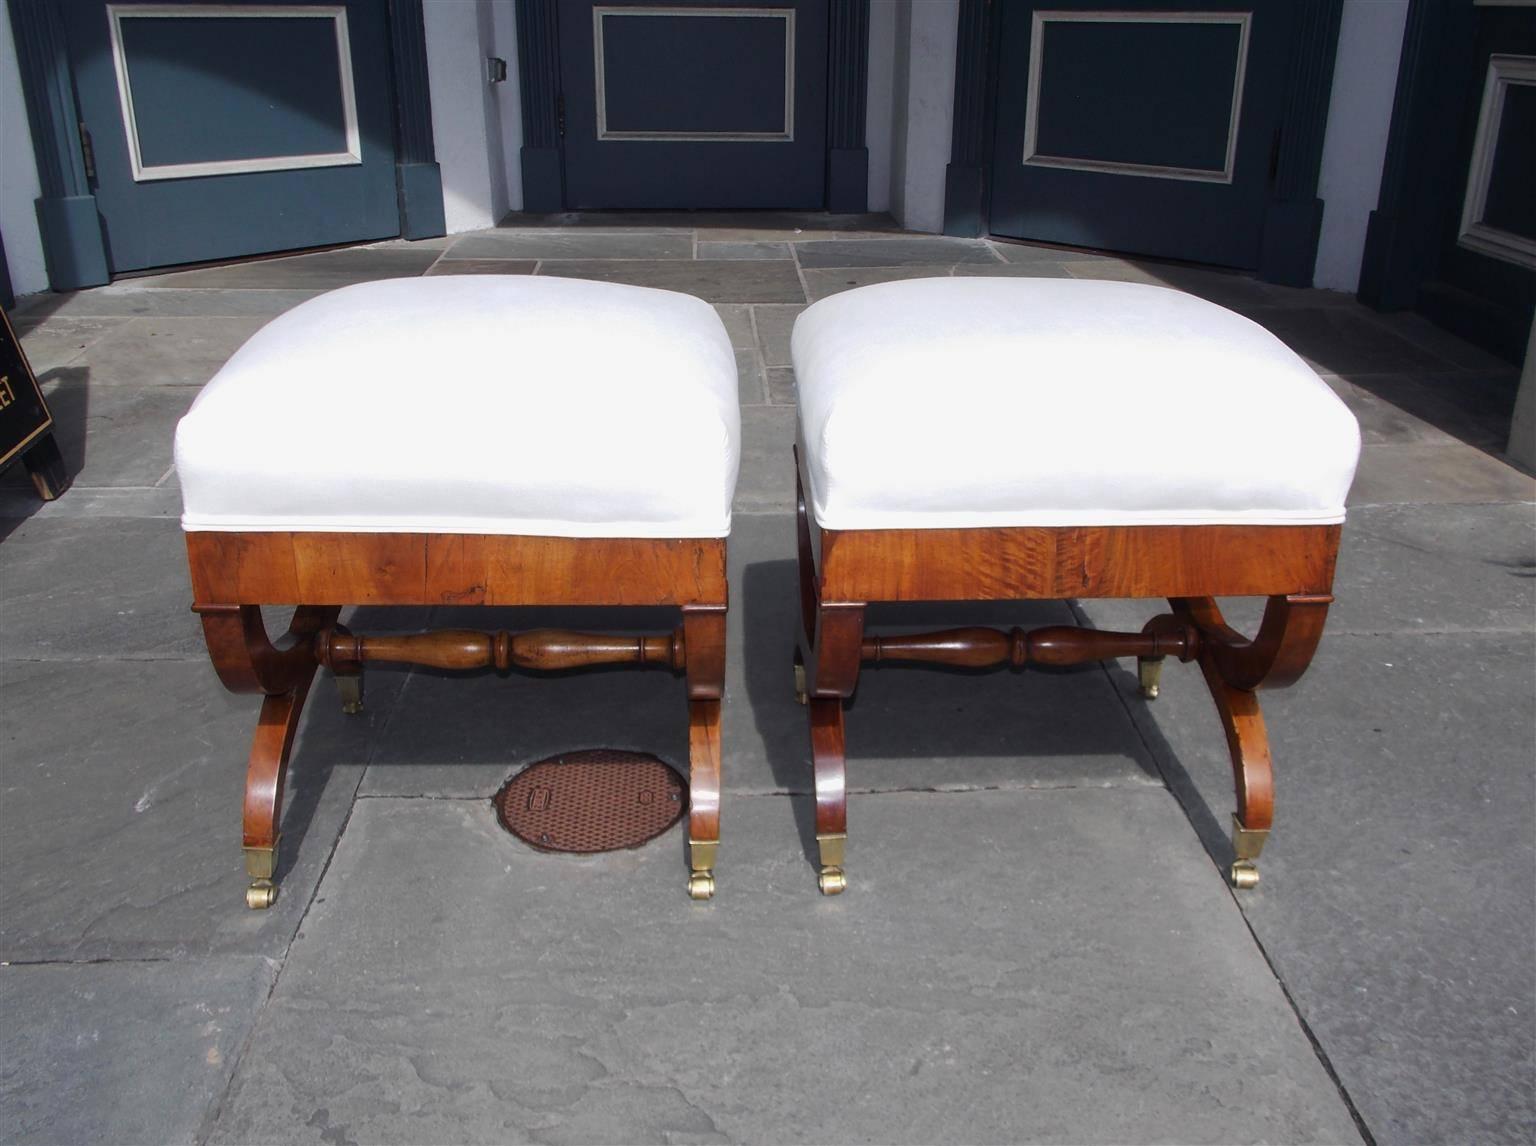 Pair of English walnut crule fire side benches with banded skirt, intertwined legs with connecting bulbous stretchers and terminating on original brass casters. Benches are upholstered in white muslin, Early 19th century.